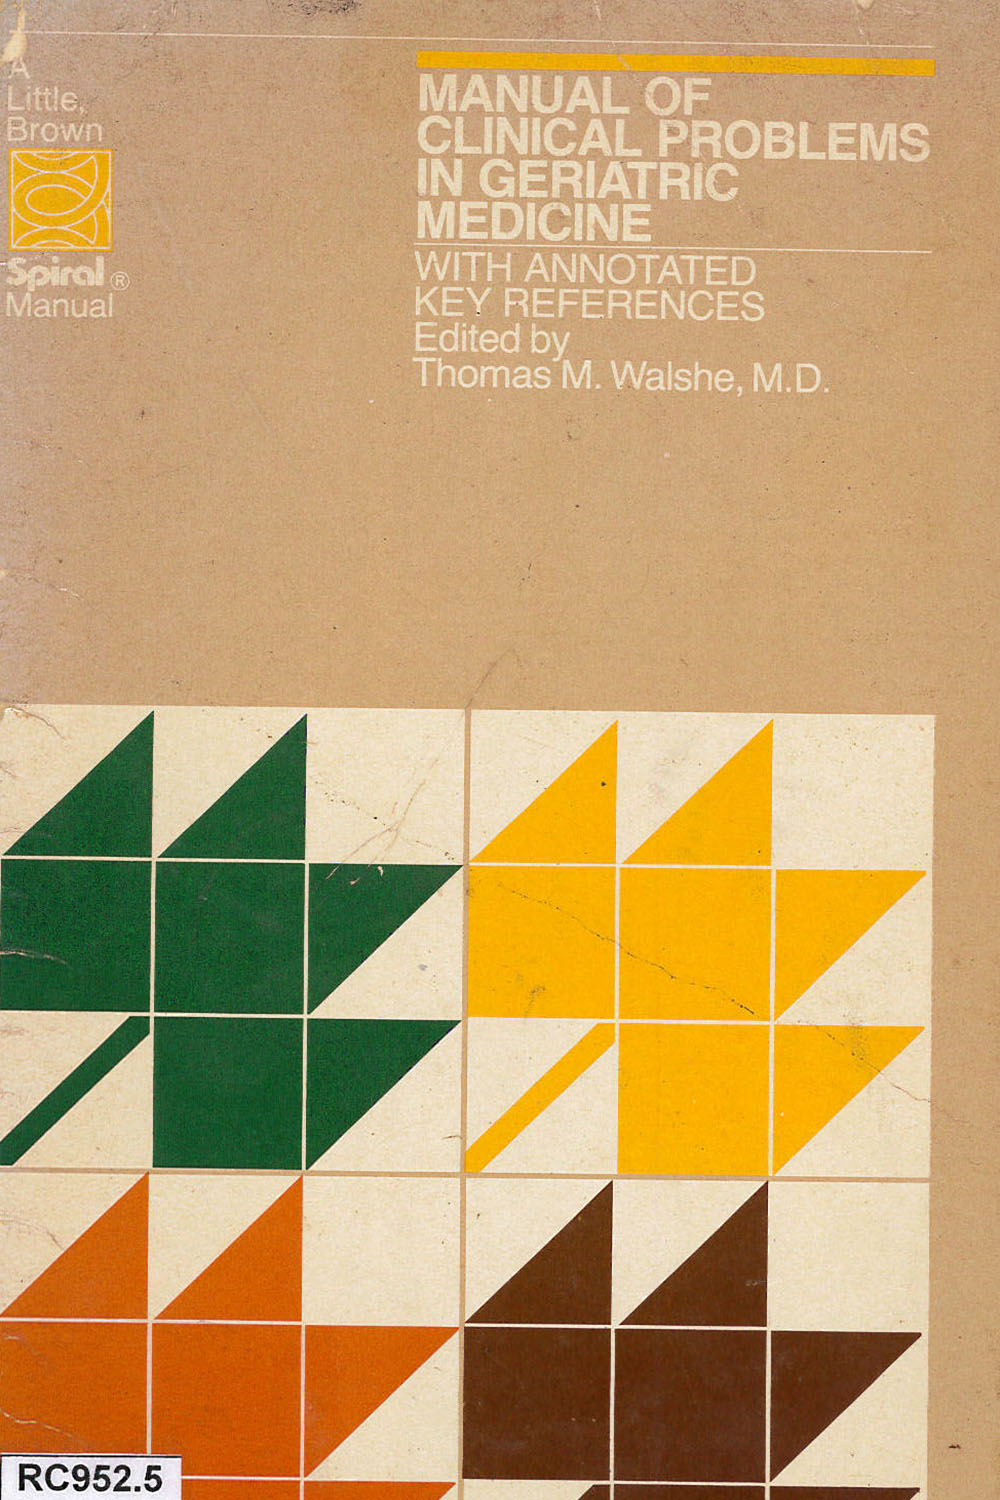 13 / 26 - RC952.5 M35 Manual of Clinical Problems in Geriatric Medicine - Spiral Manual, USA 1985